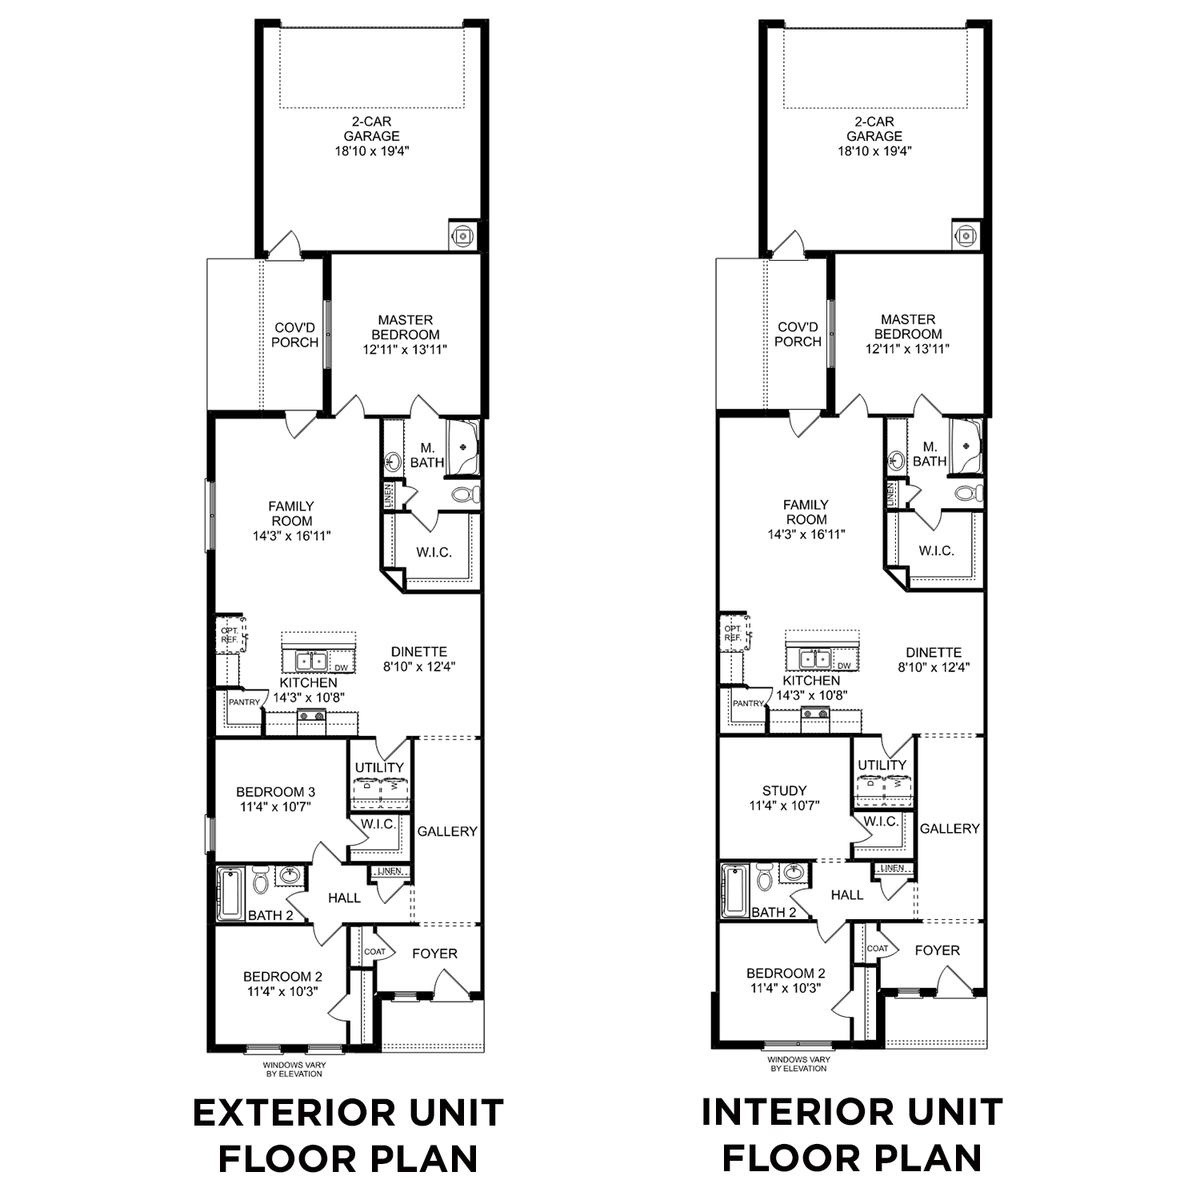 1 - The Camilla C floor plan layout for 417 Ronnie Drive in Davidson Homes' Cain Park community.